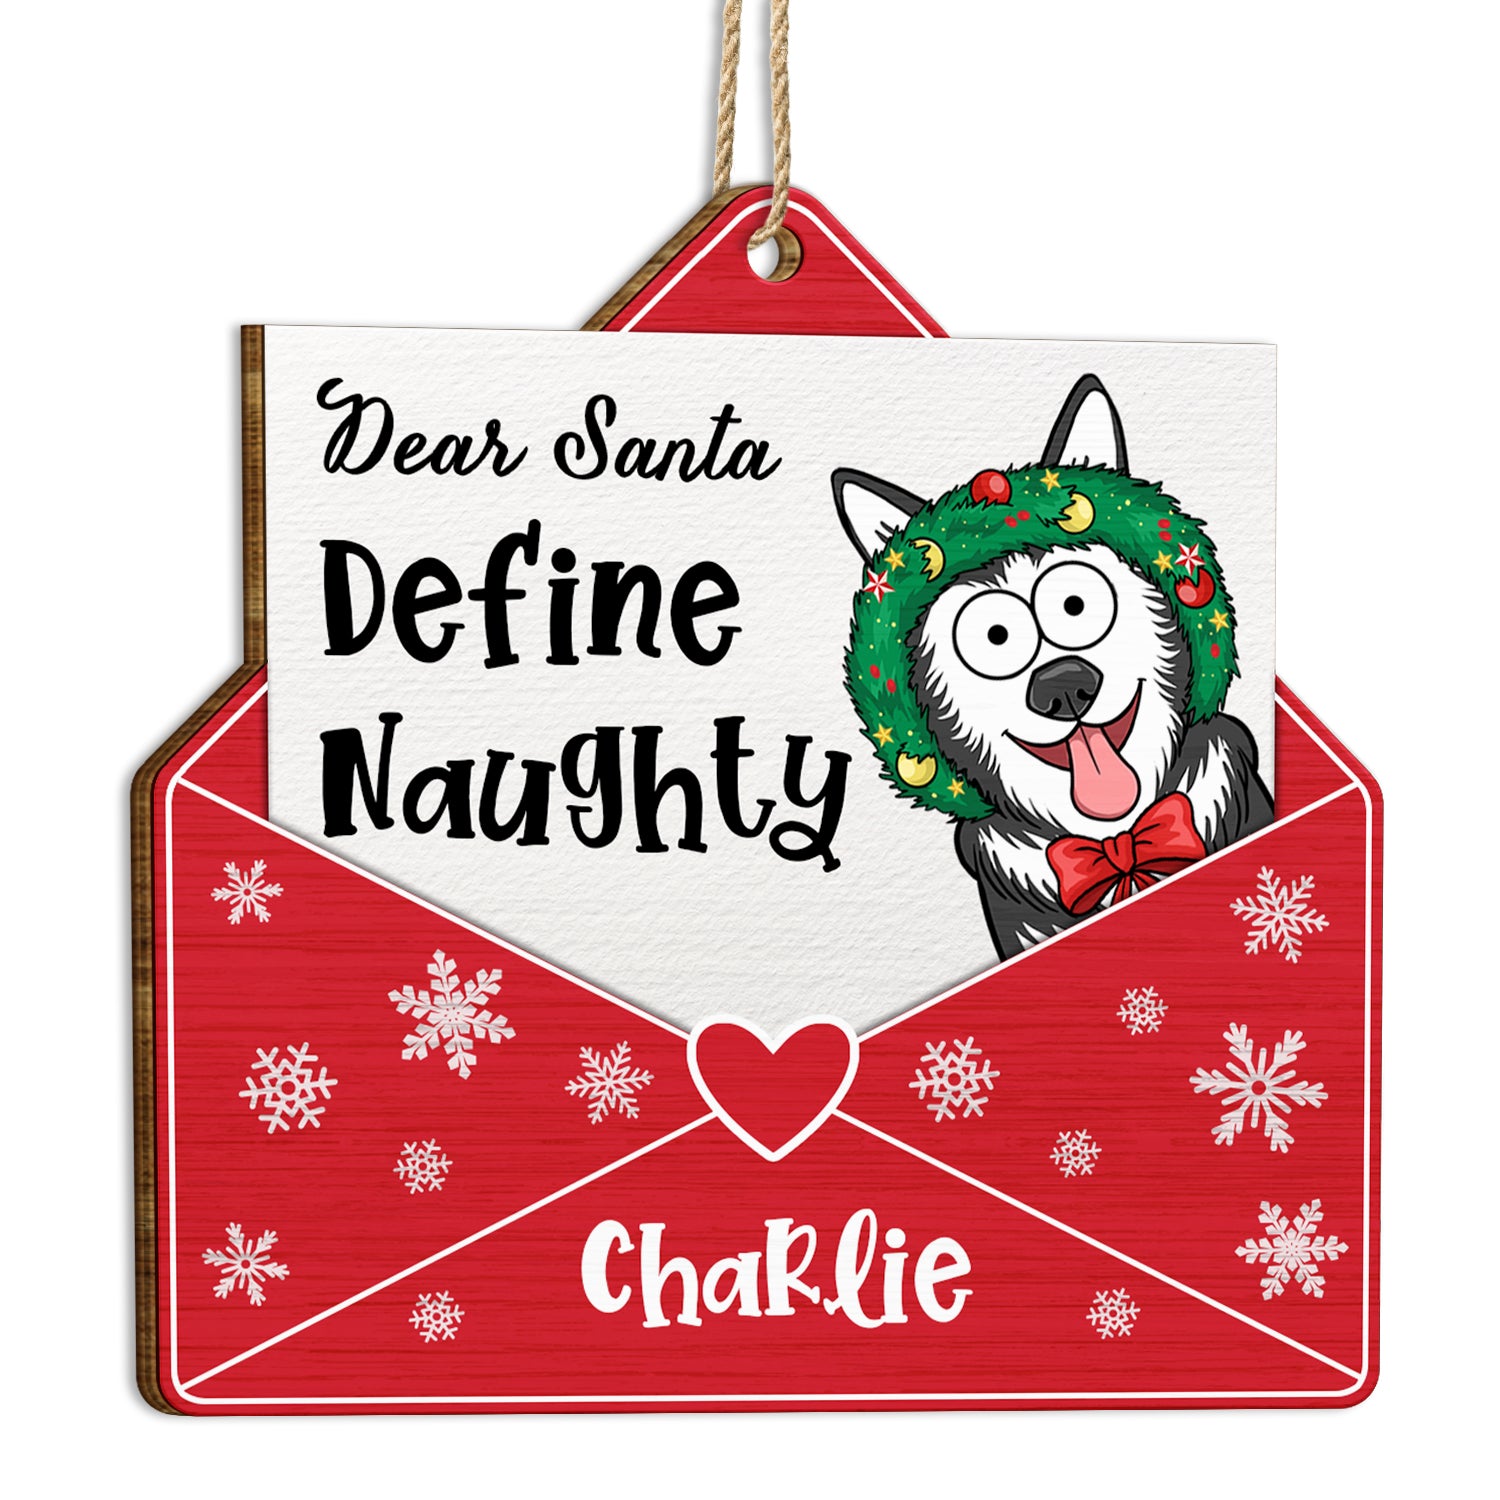 Dear Santa - Christmas Gift For Dog Lovers - Personalized Custom Shaped Wooden Ornament